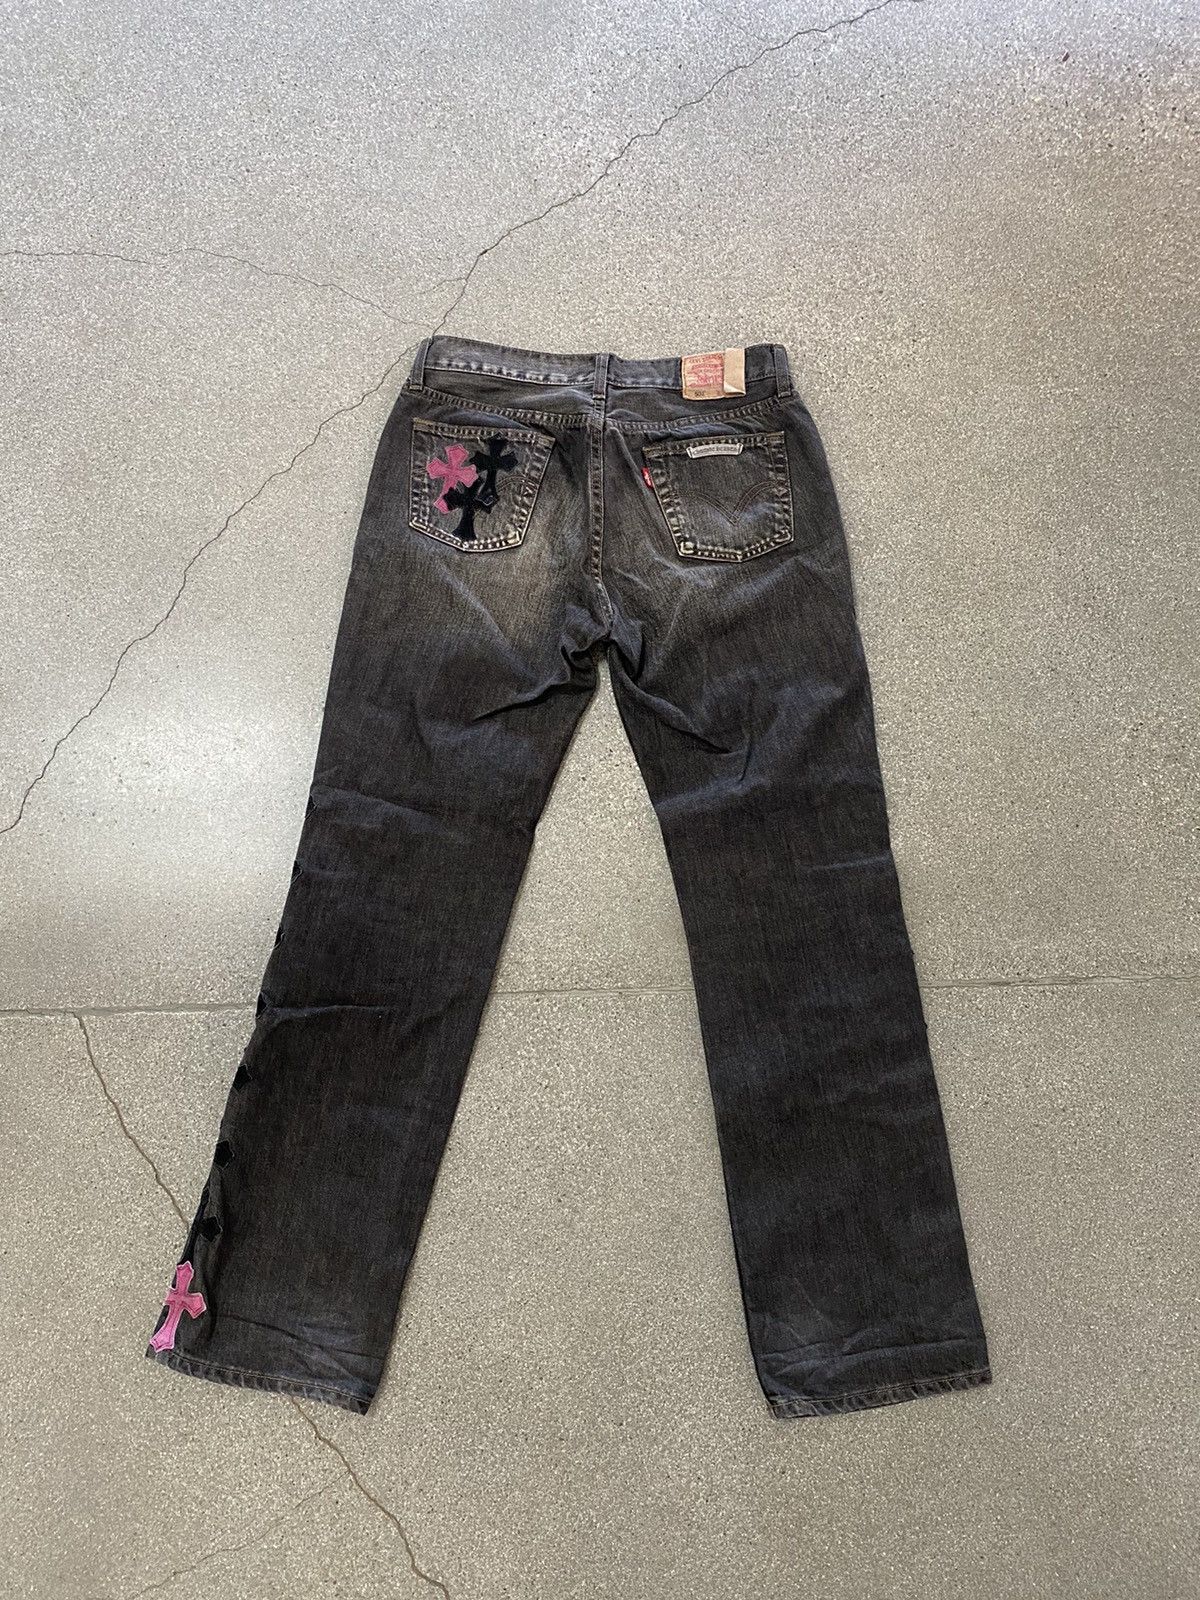 Chrome Hearts Cross Patch Denim Jeans (Special Order) Size US 30 / EU 46 - 2 Preview